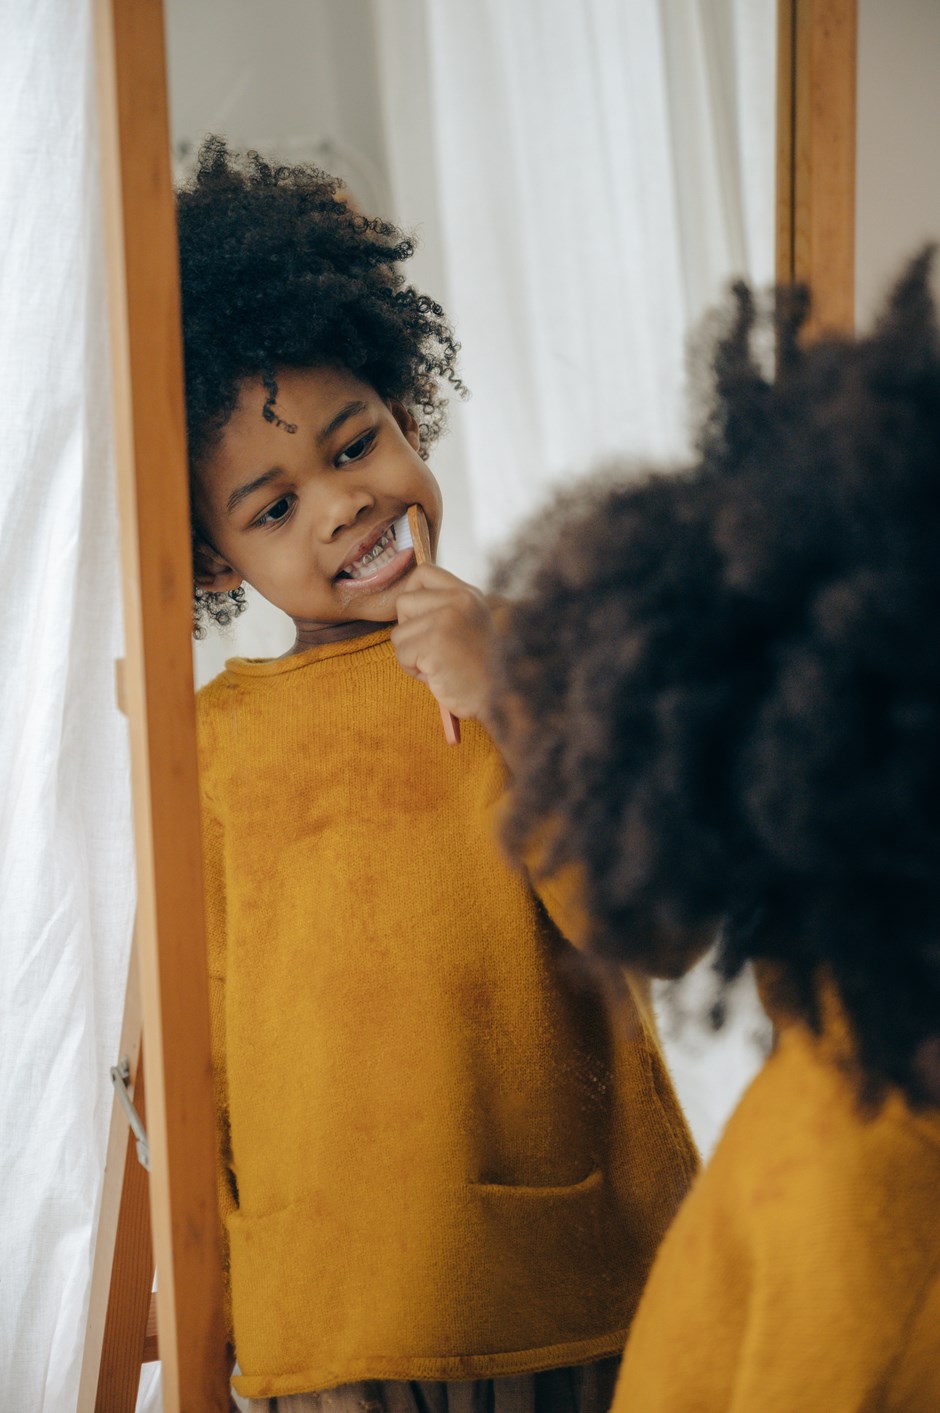 Child in a yellow jumper brushing their teeth in the mirror.